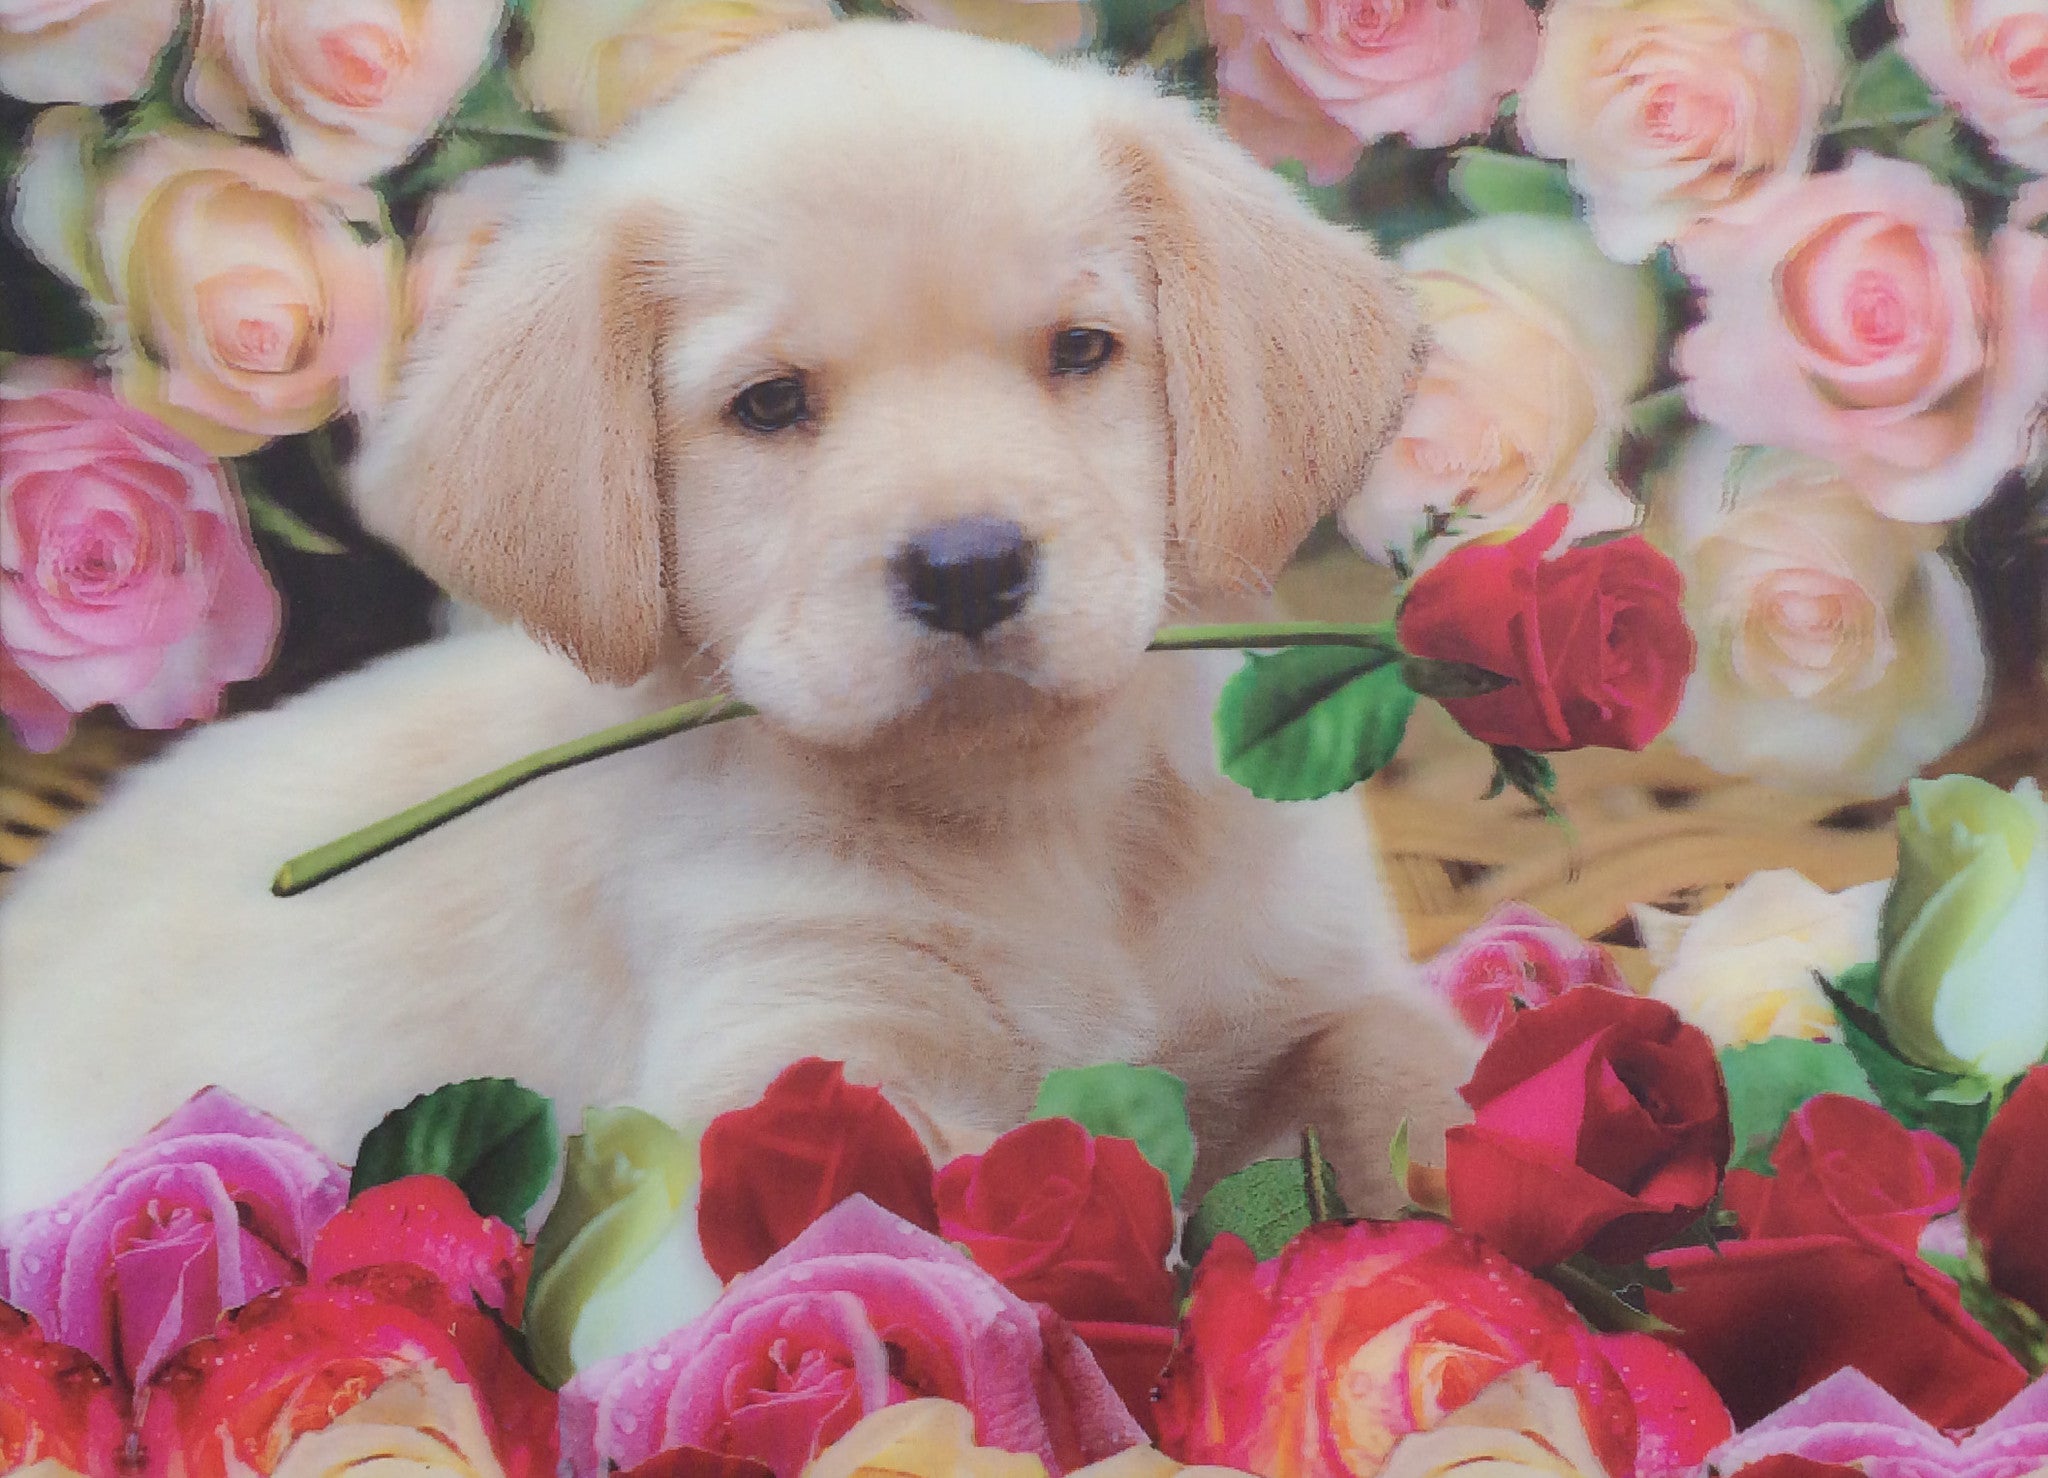 Cute Puppies With Roses | www.imgkid.com - The Image Kid Has It!